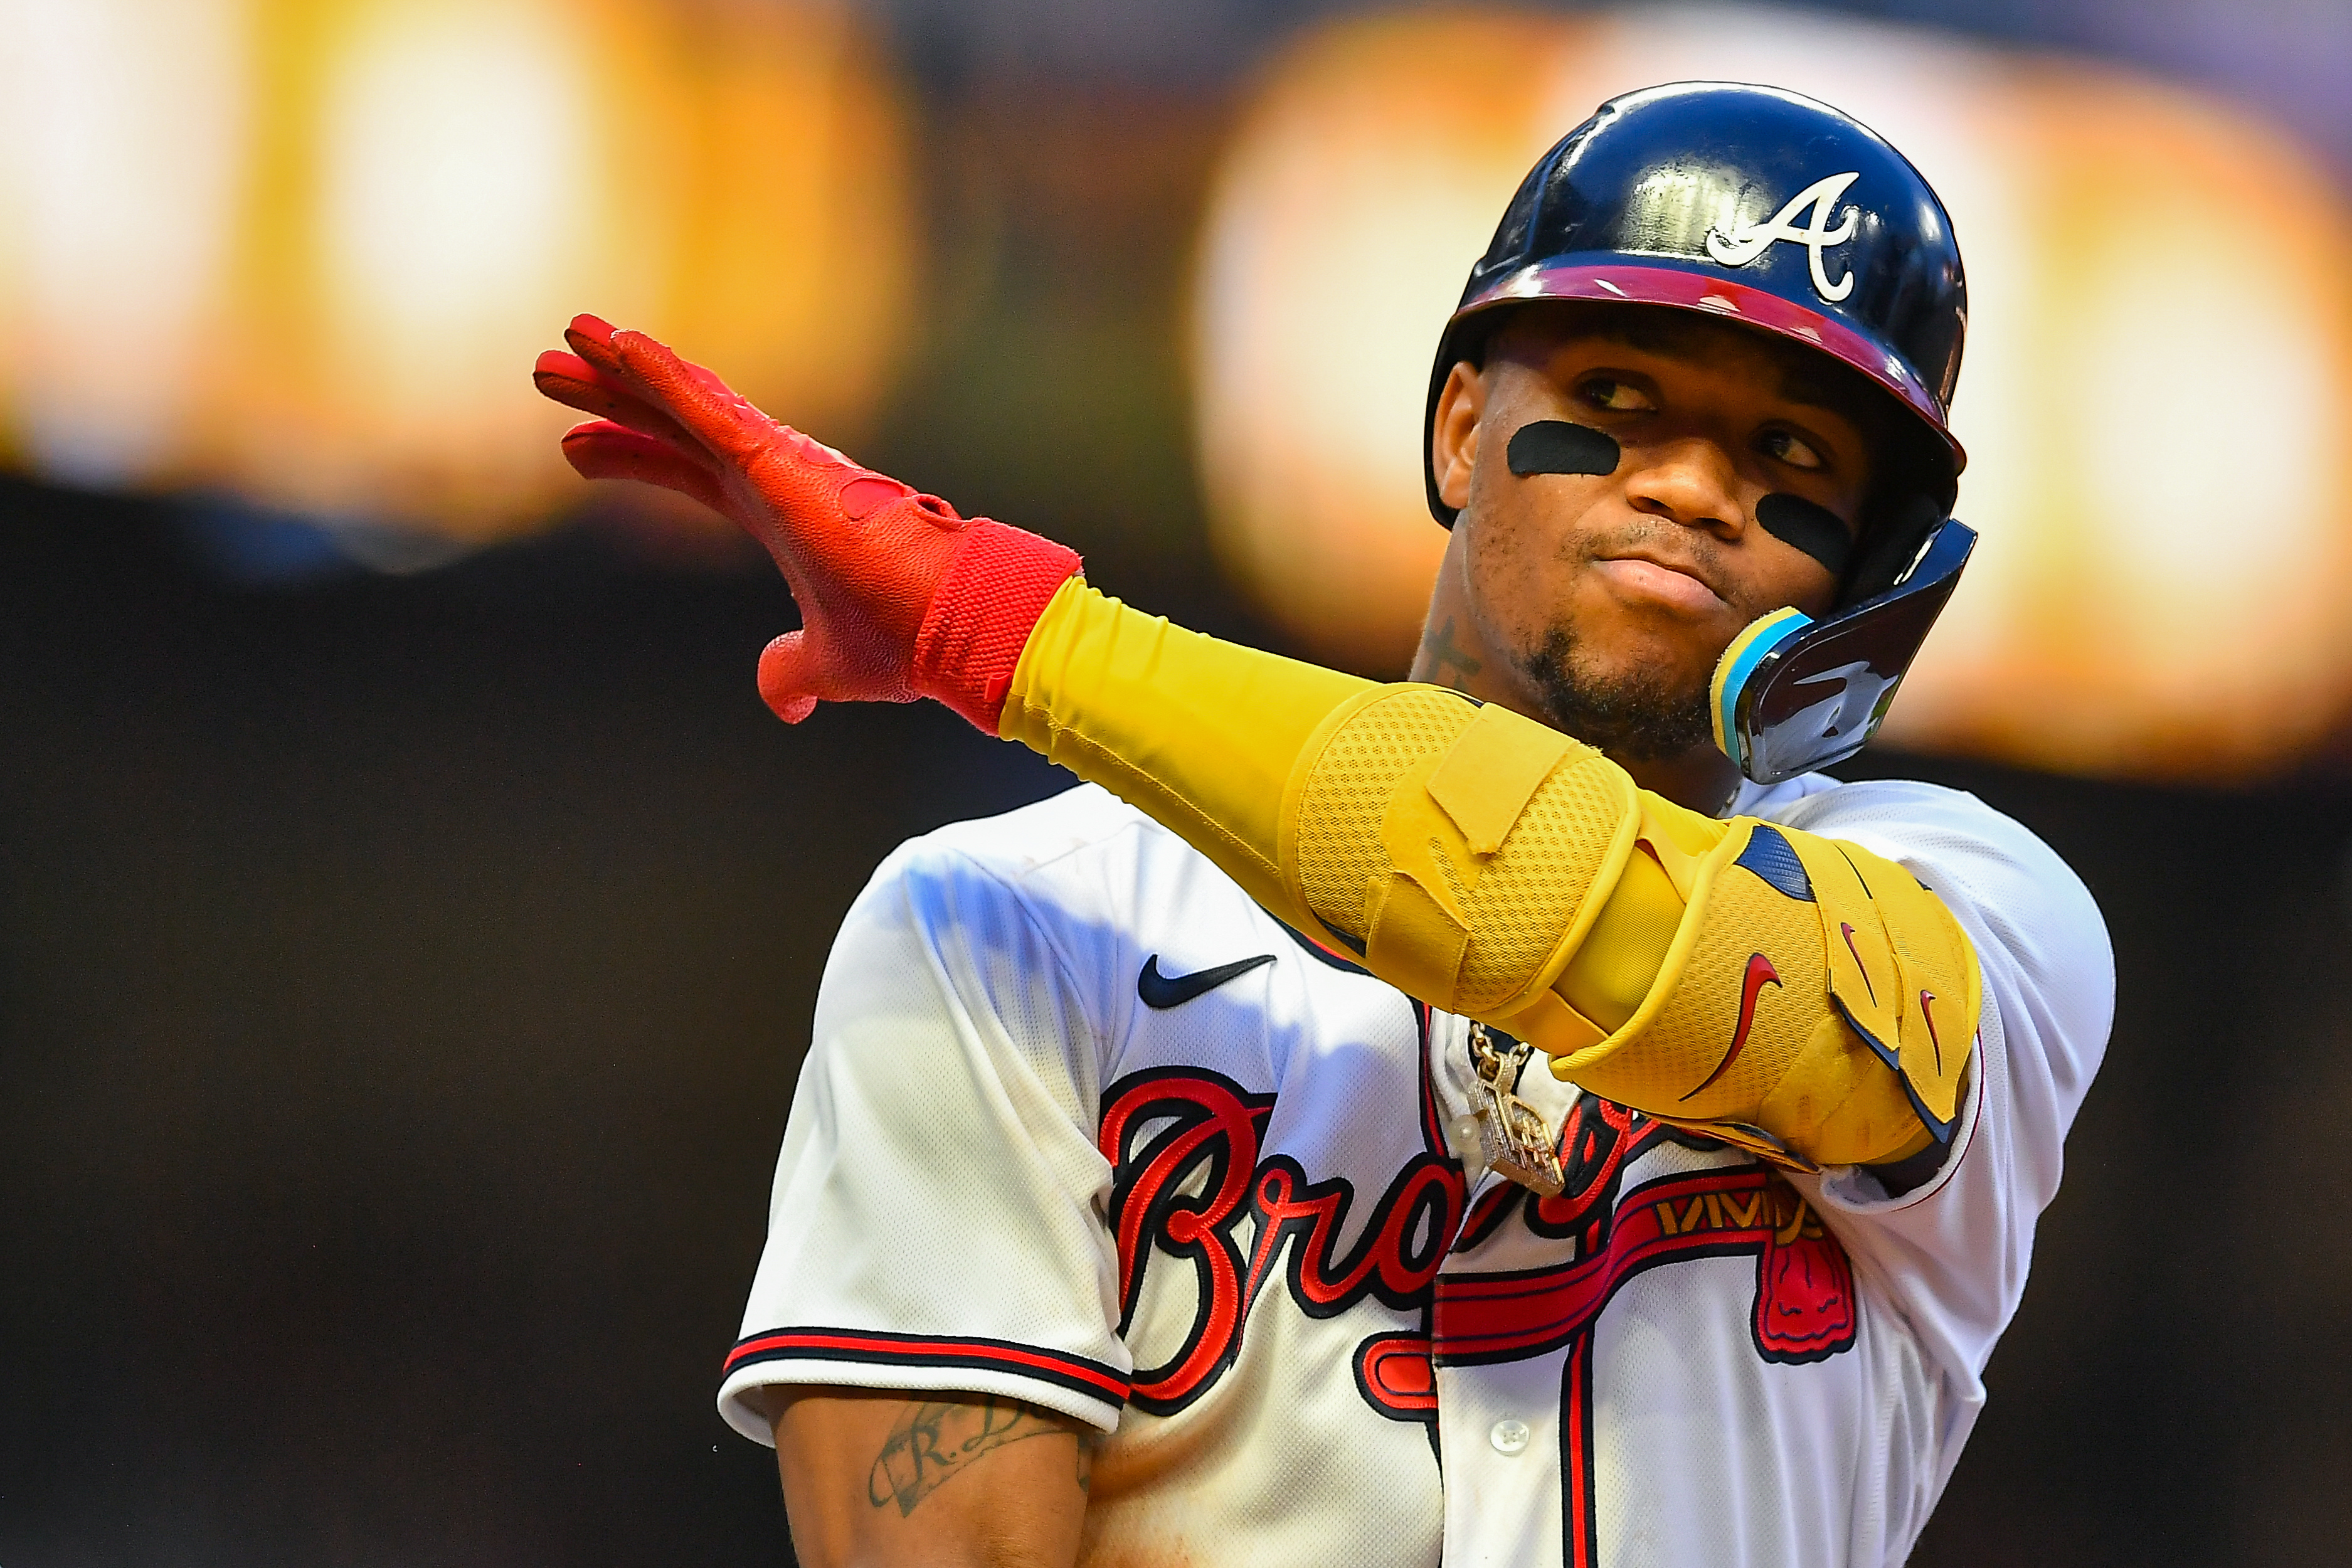 Atlanta Braves star Ronald Acuna Jr. leaves game with ankle injury